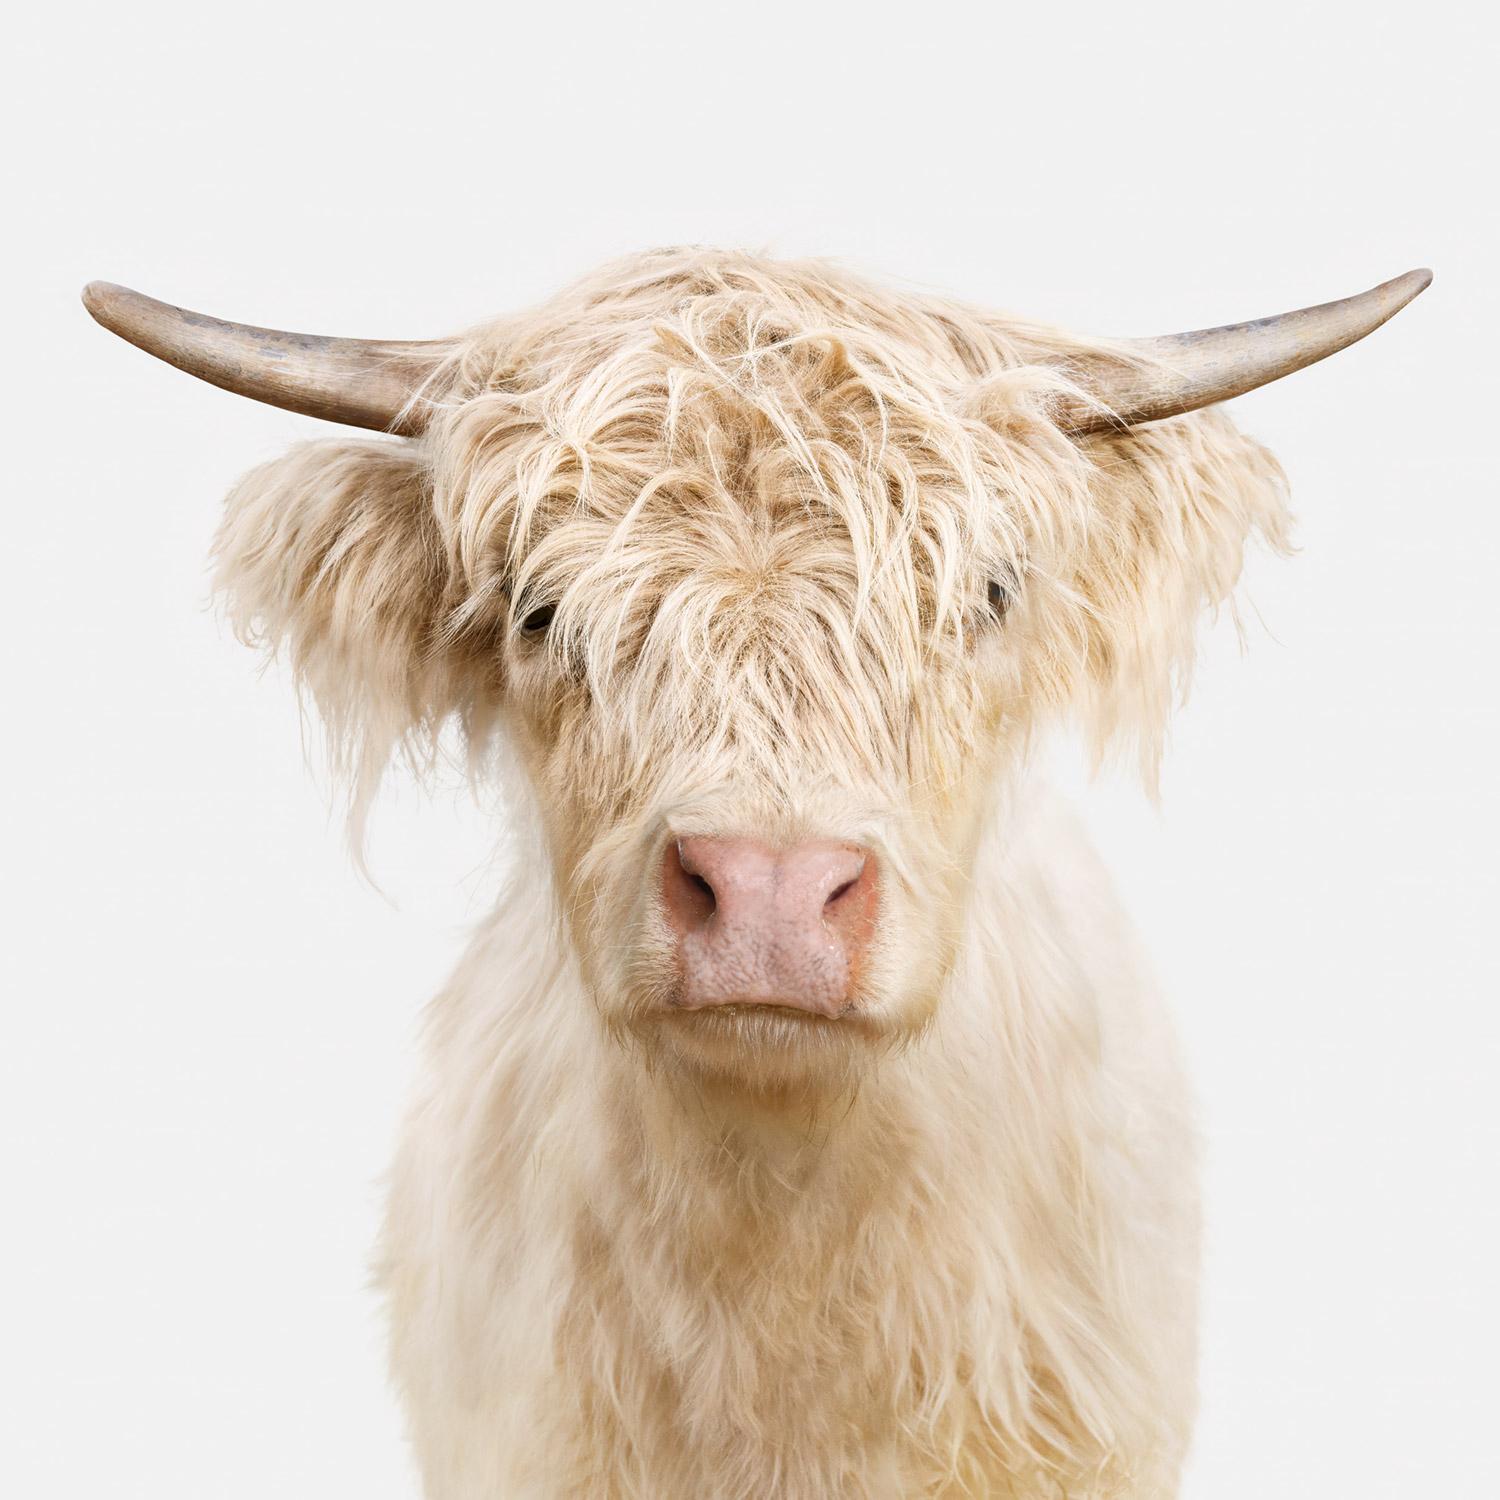 "Capturing the eyes of an animal is always powerful but especially so with Highland cows. It is almost as if you’ve uncovered a secret or discovered a hidden gem. And a gem she was. Rose was by far the friendliest Highland and always seemed eager to